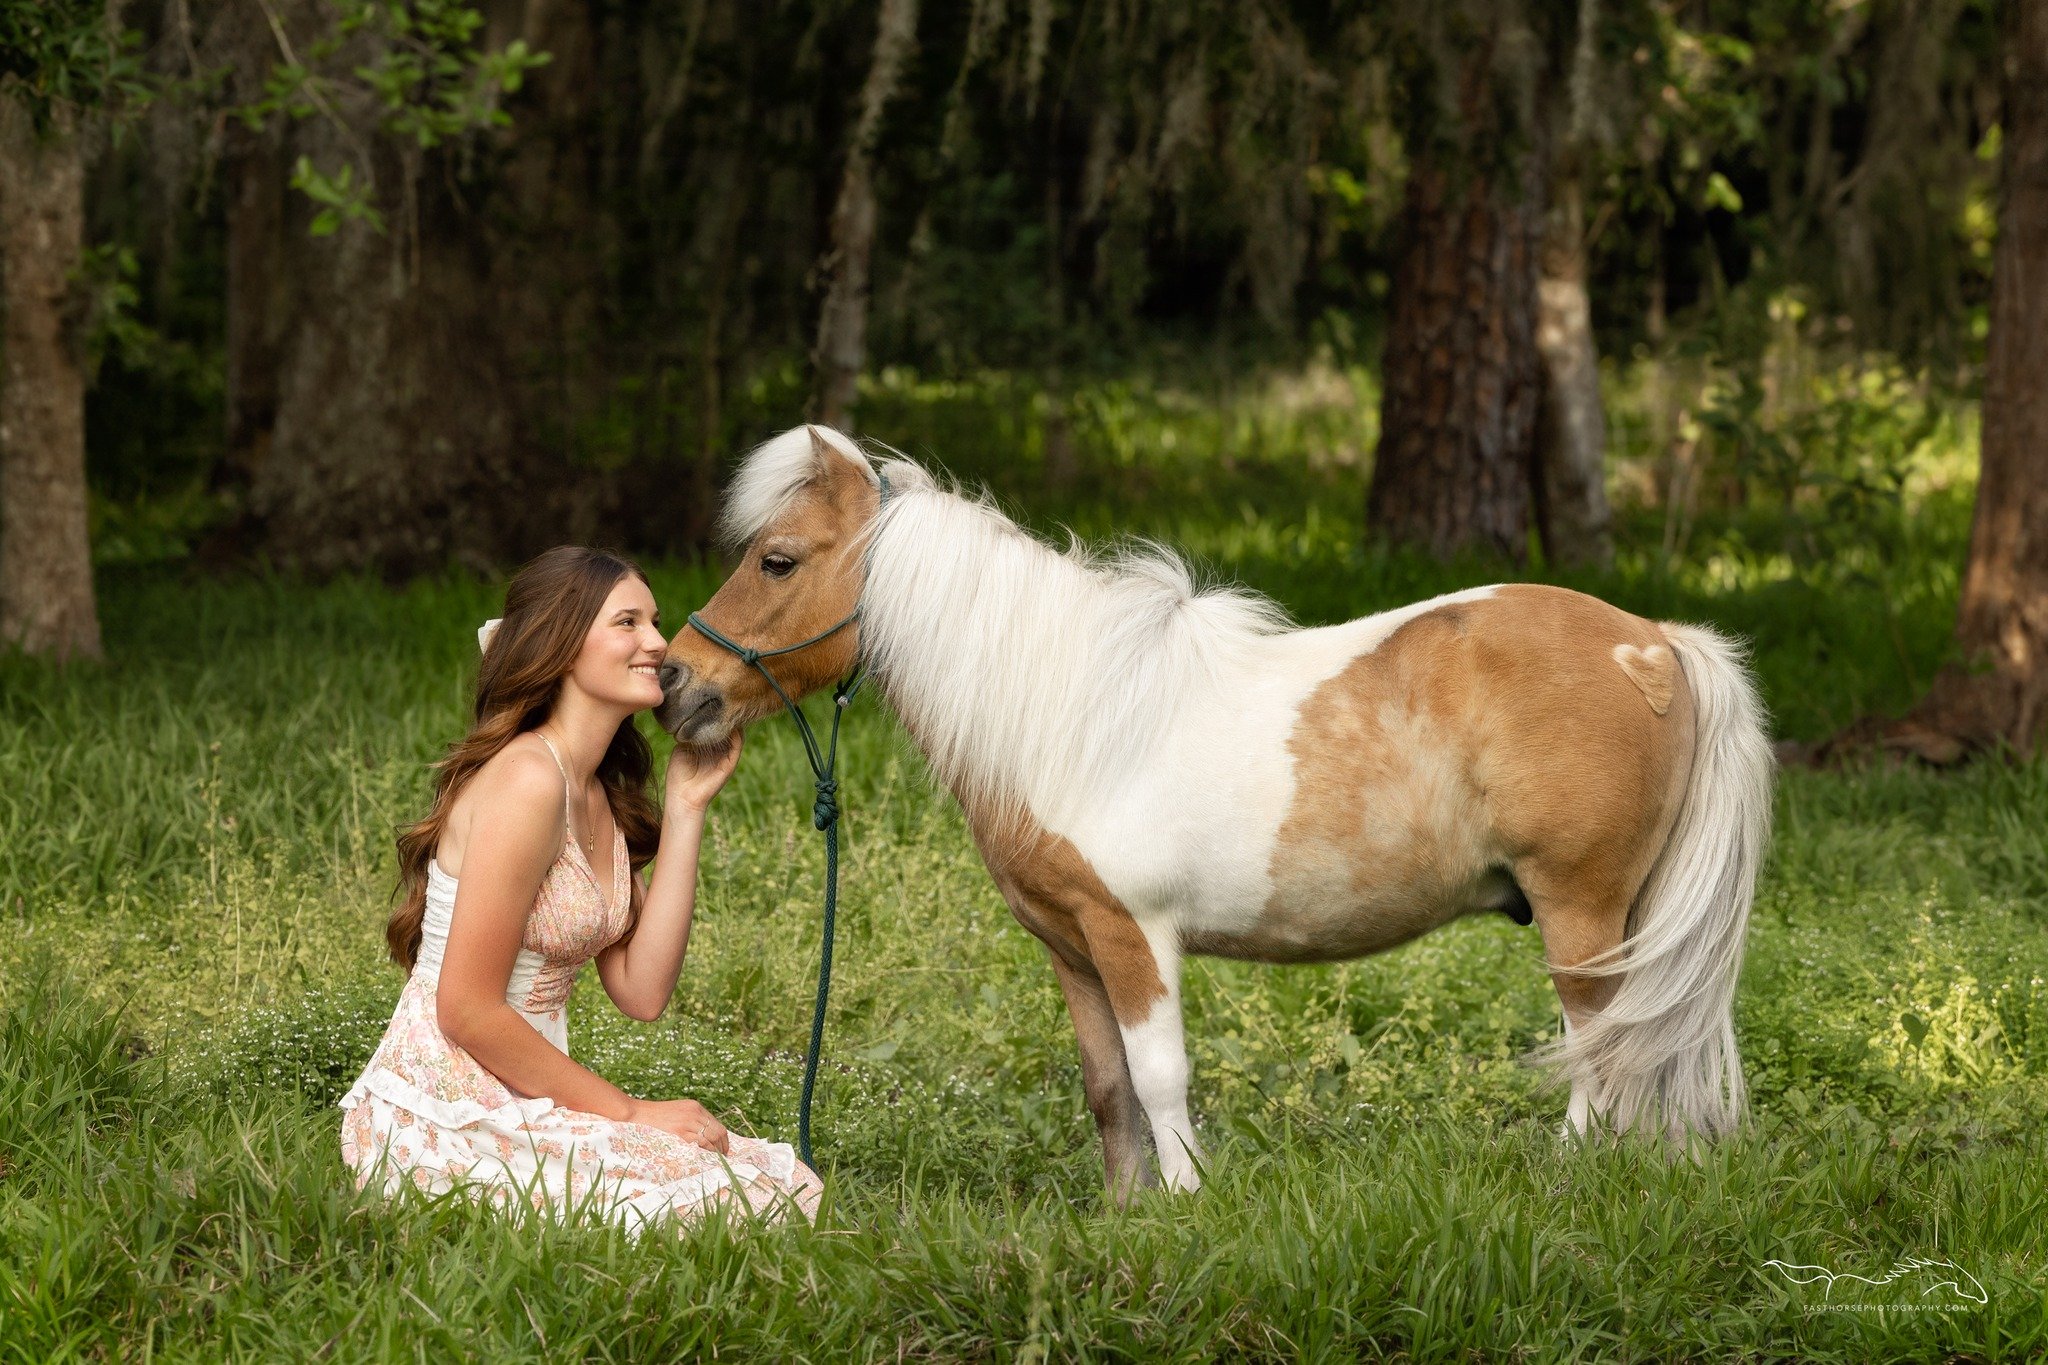 It's a hard time of year for the little minis and ponies here in Florida. The grass is so green and delicious, and the stomach never feels full when you are a little ball of attitude. Who has a little tubby love muffin at home that is wishing they co